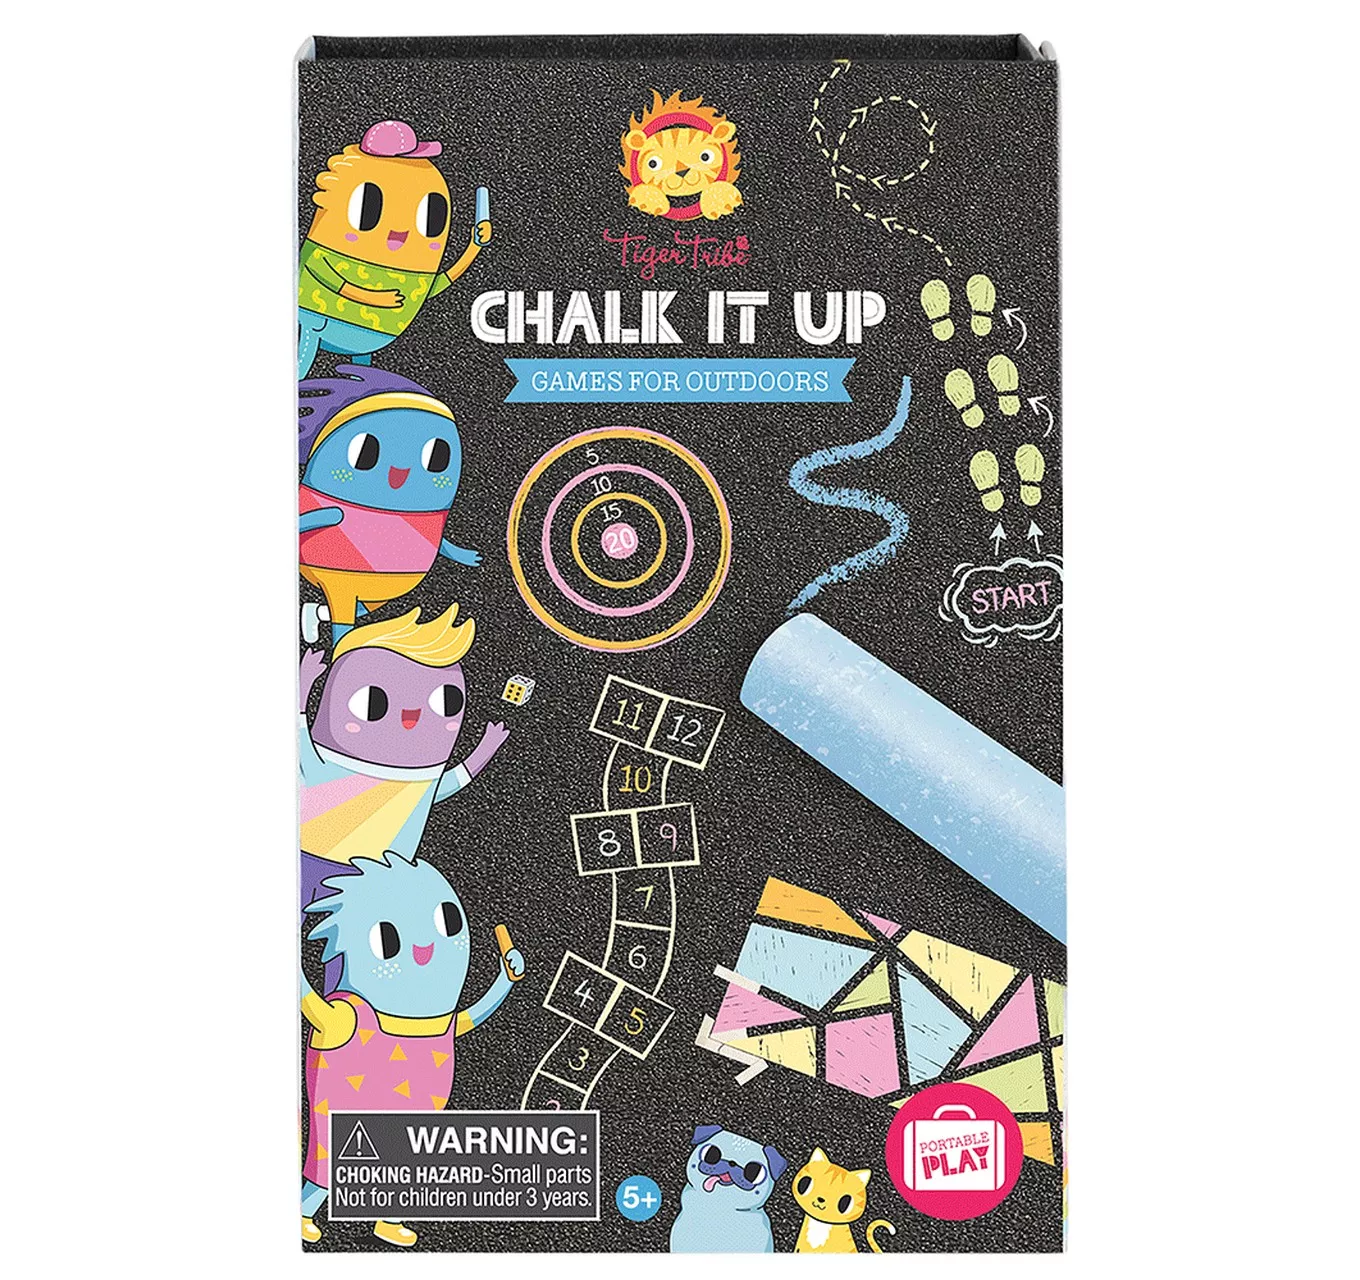 Chalk it Up Games for Outdoors